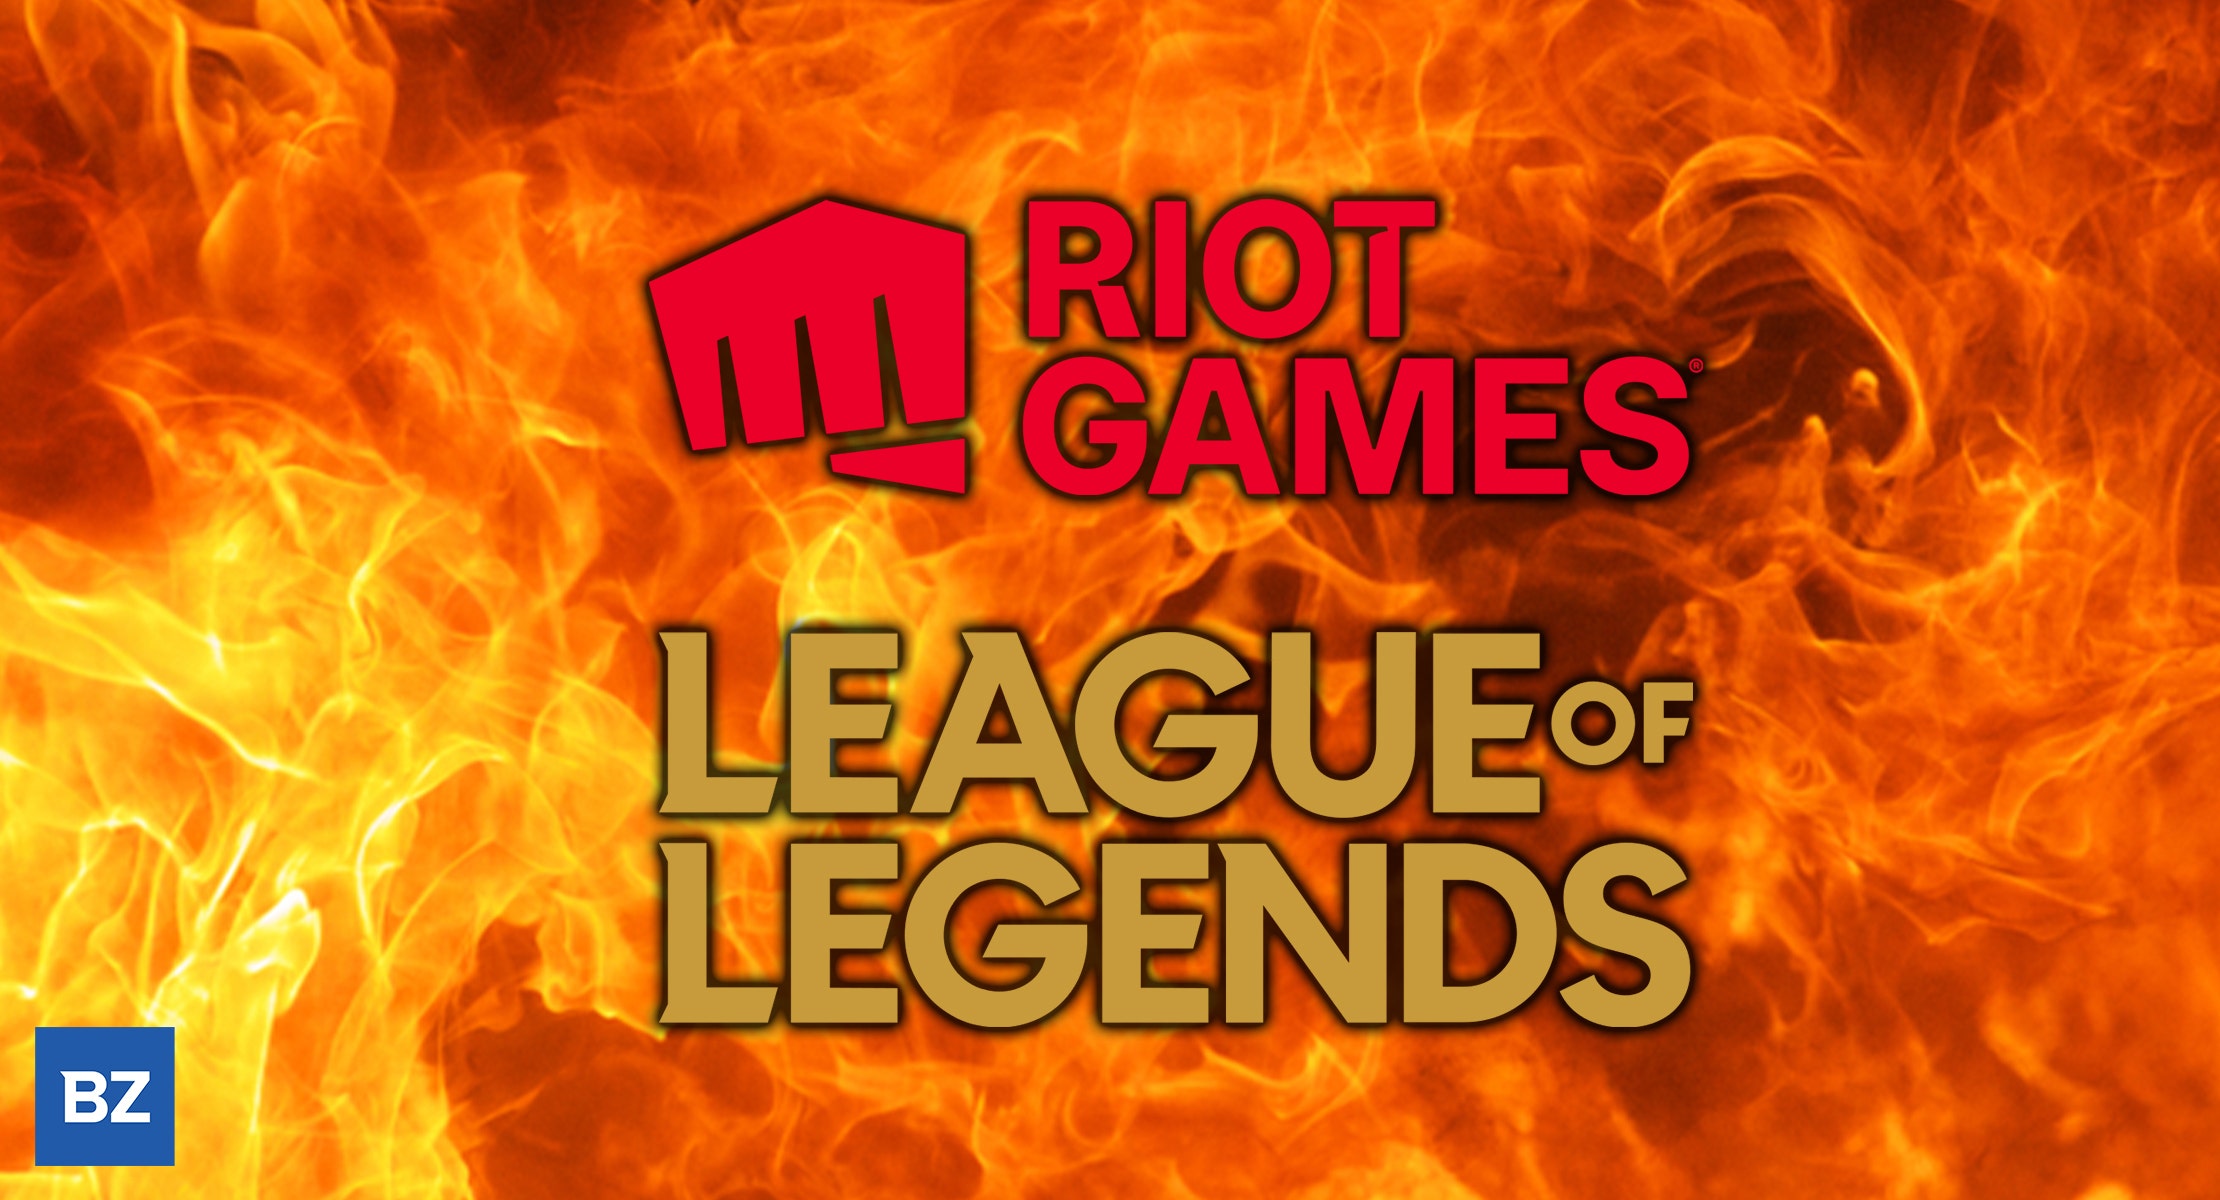 Riot Games Refuses To Give In To Blackmailers After League of Legends Source Code Hack